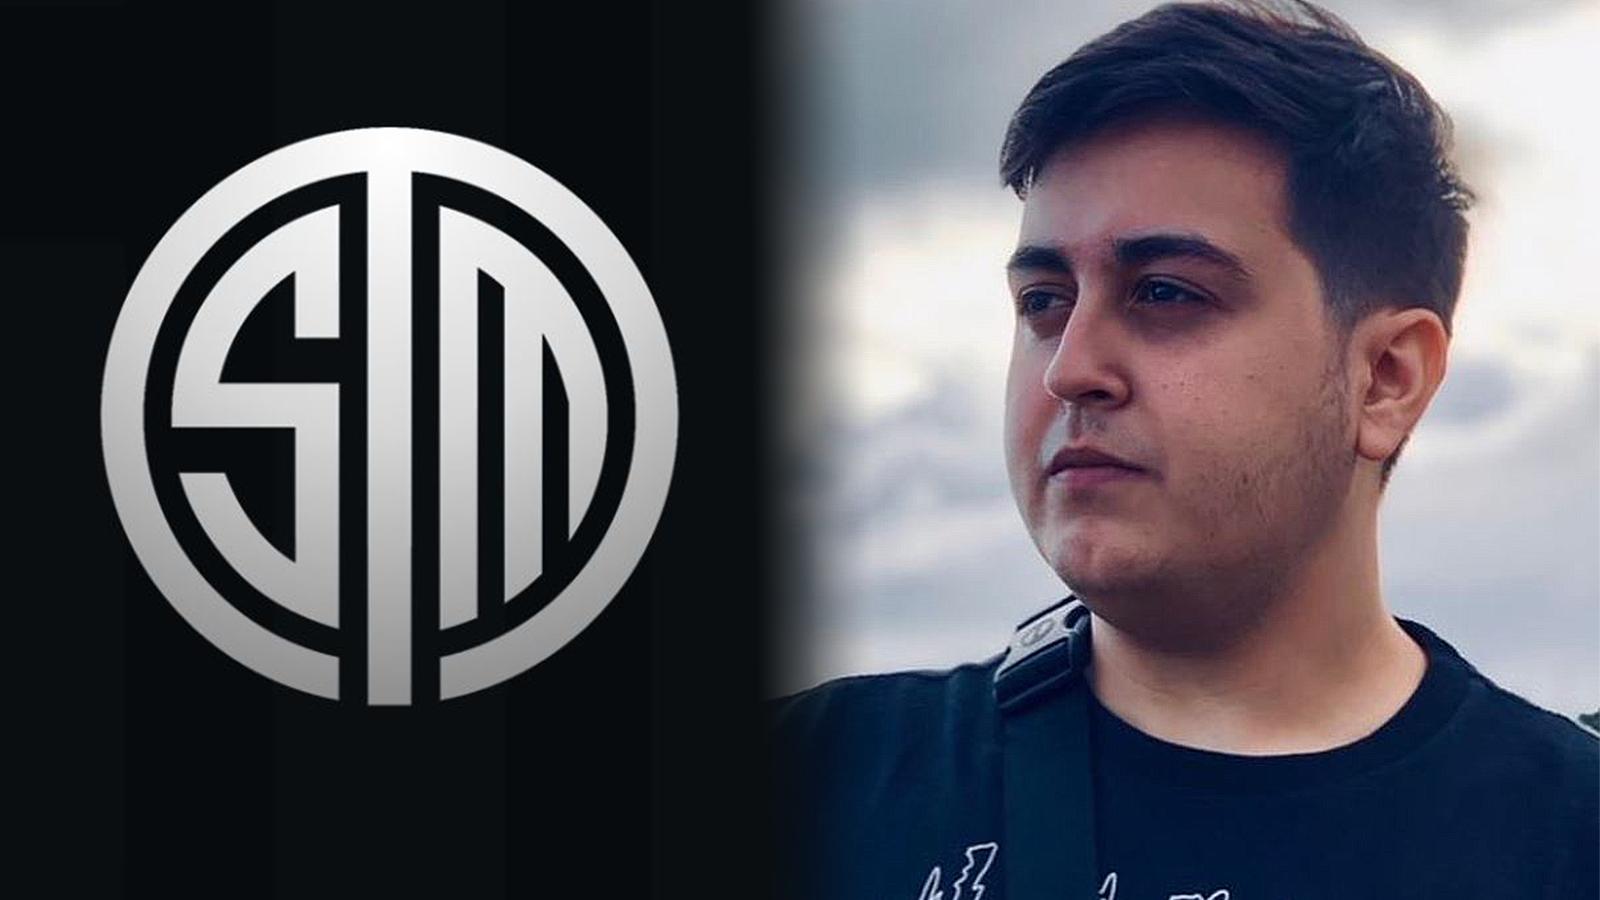 The TSM logo is positioned side-by-side with a photo of Pokelawls looking wistfully into the distance.